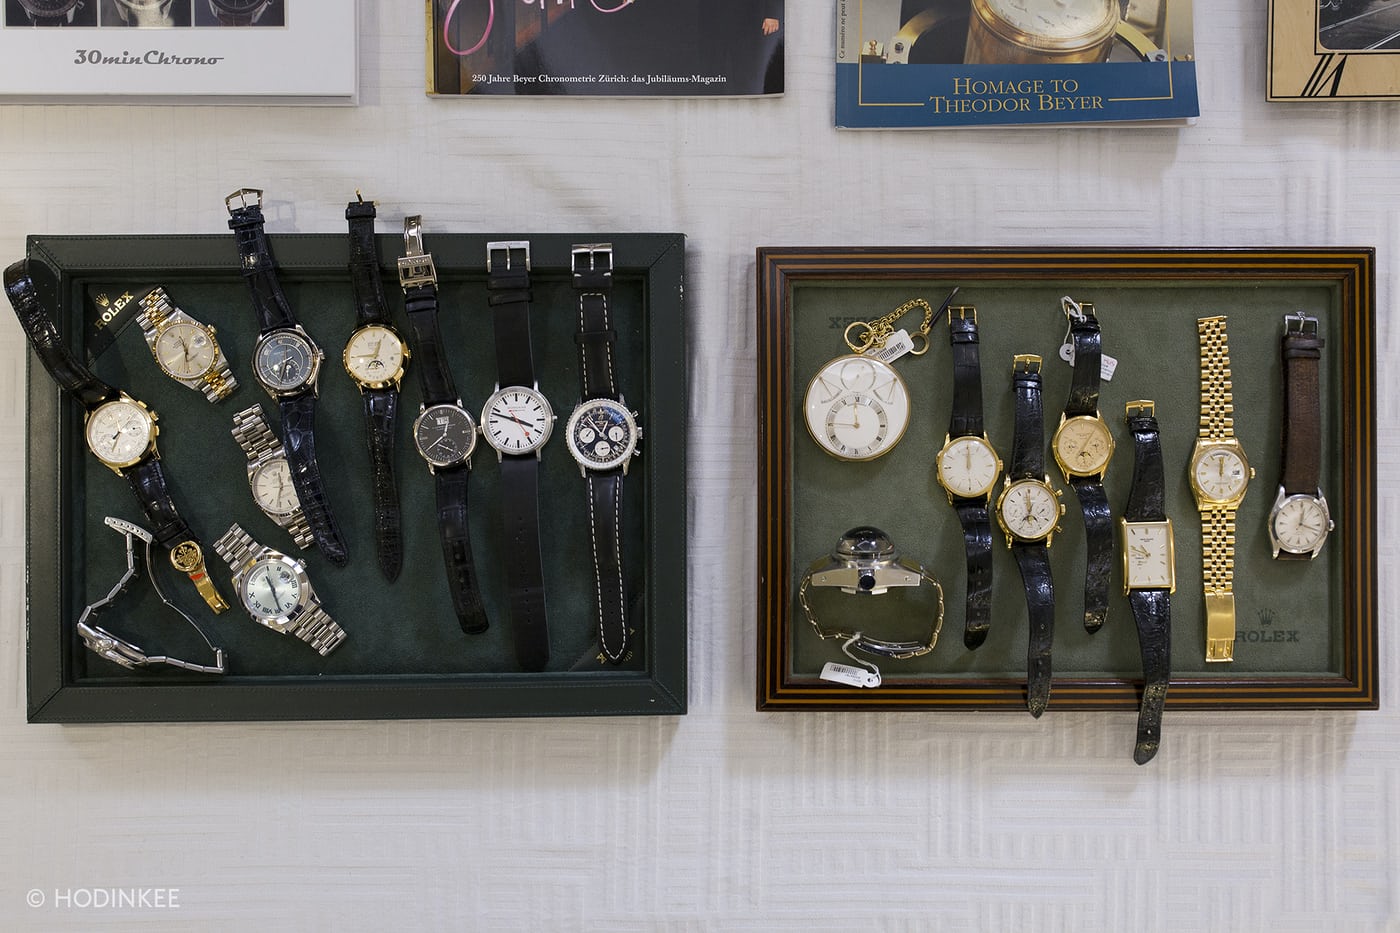 Talking Watches with René Beyer